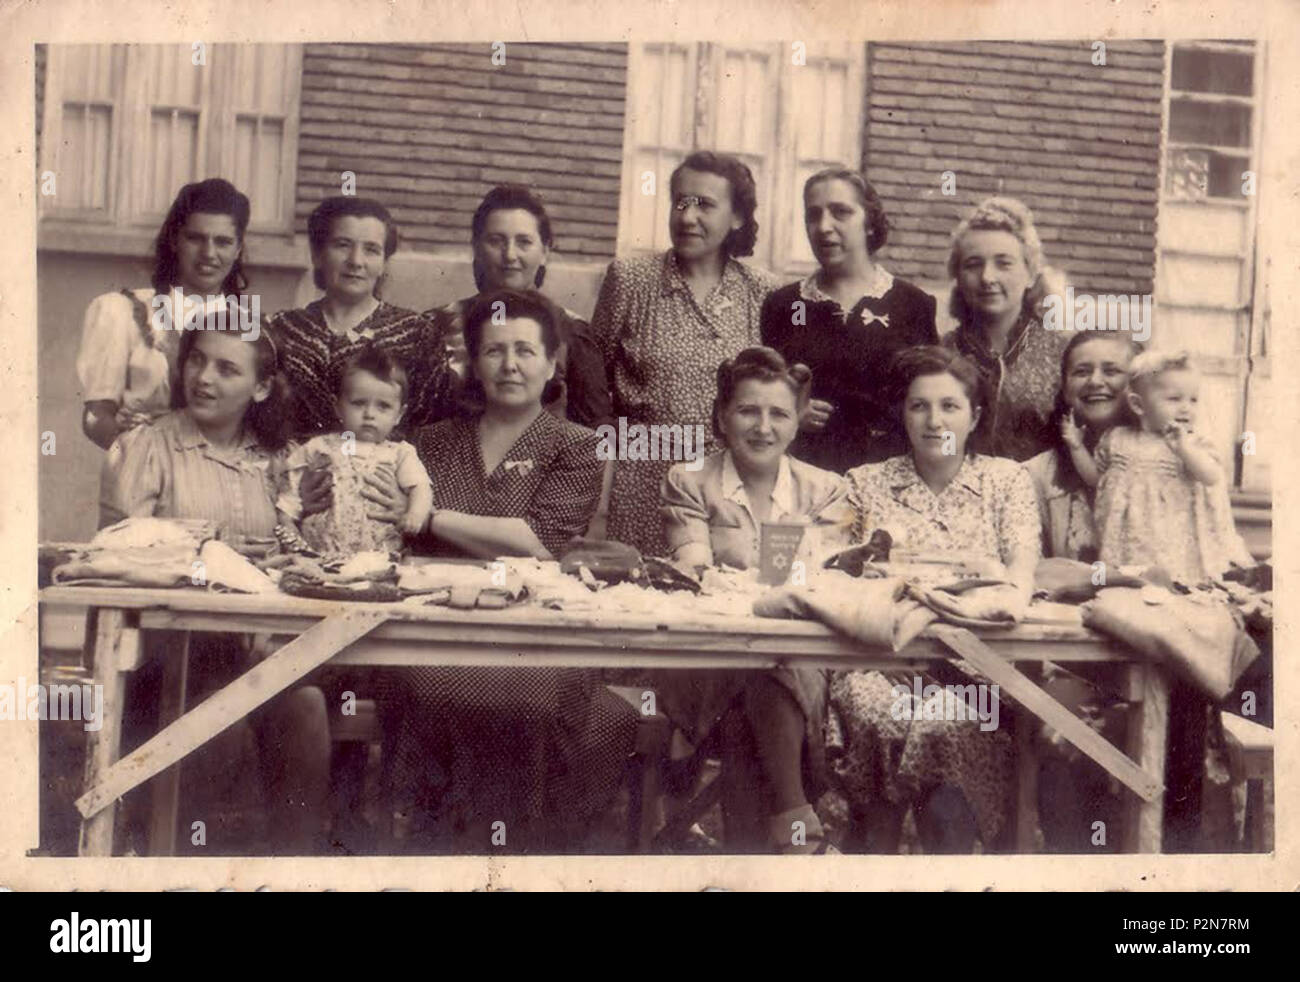 . ?????: ??????? ????? ??????? ????????? . between 1945 and 1950. Unknown 69 People in Grugliasco dp camp Stock Photo